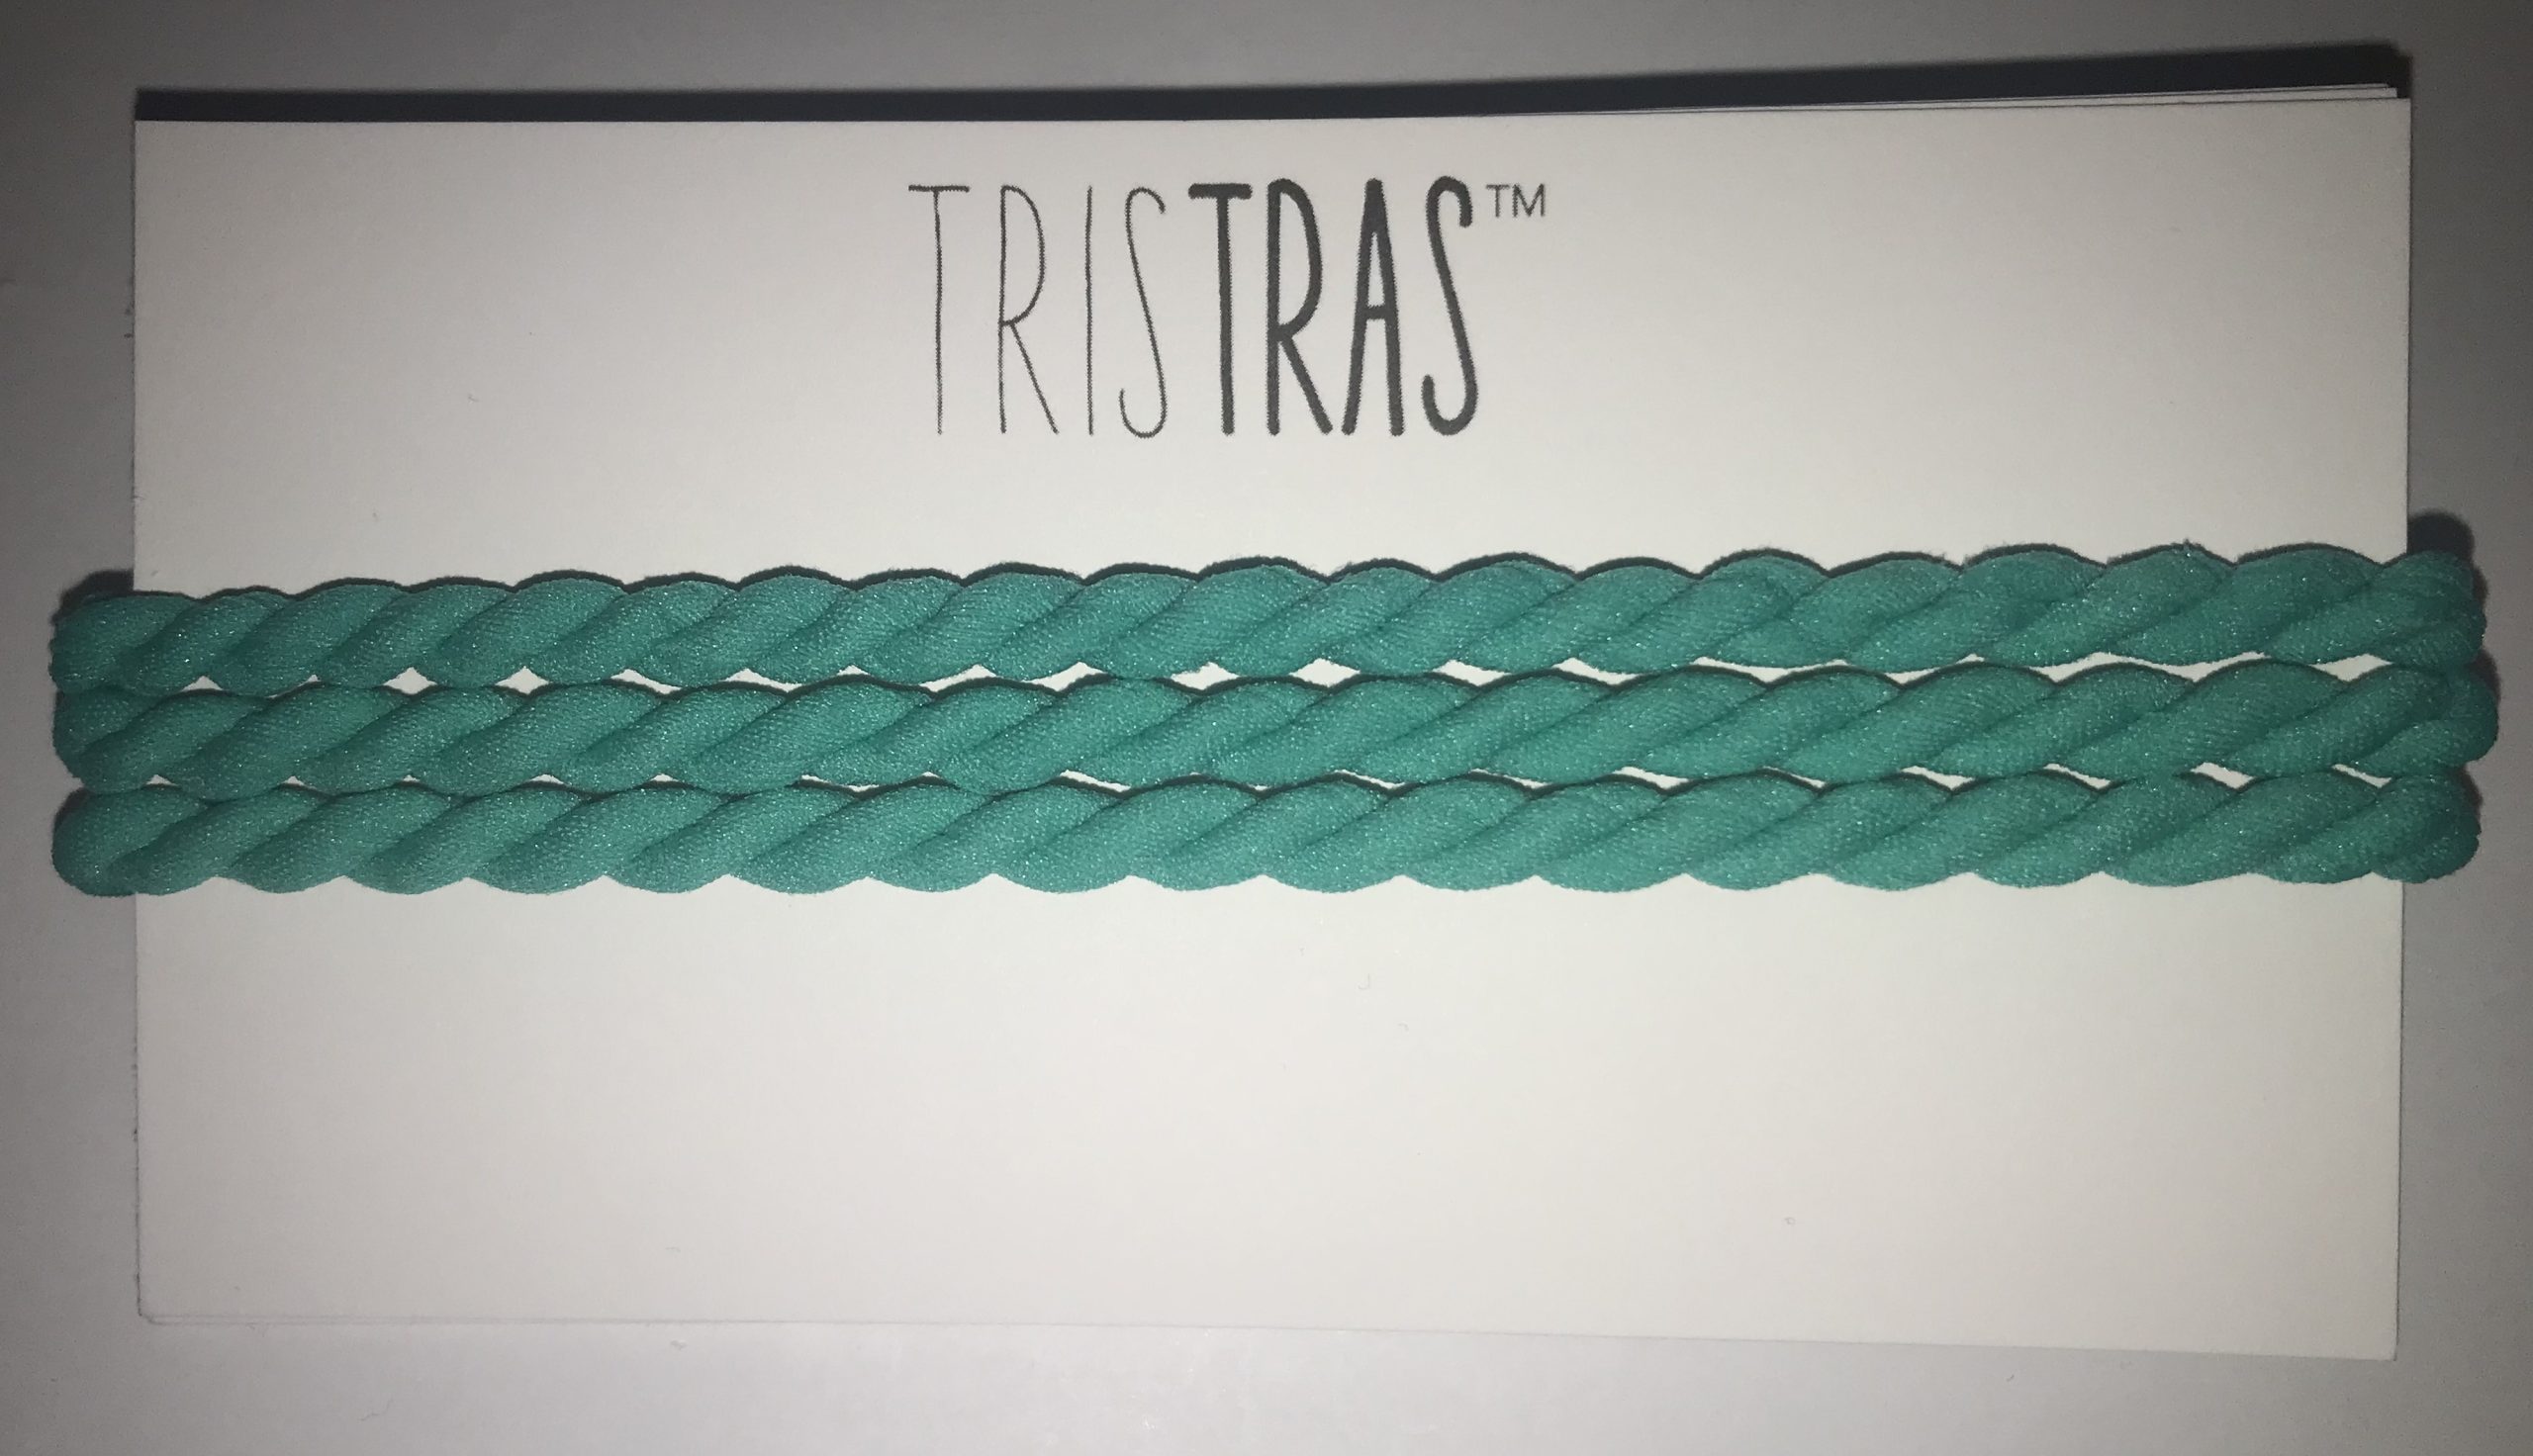 Featured image for “TrisTras set 19”